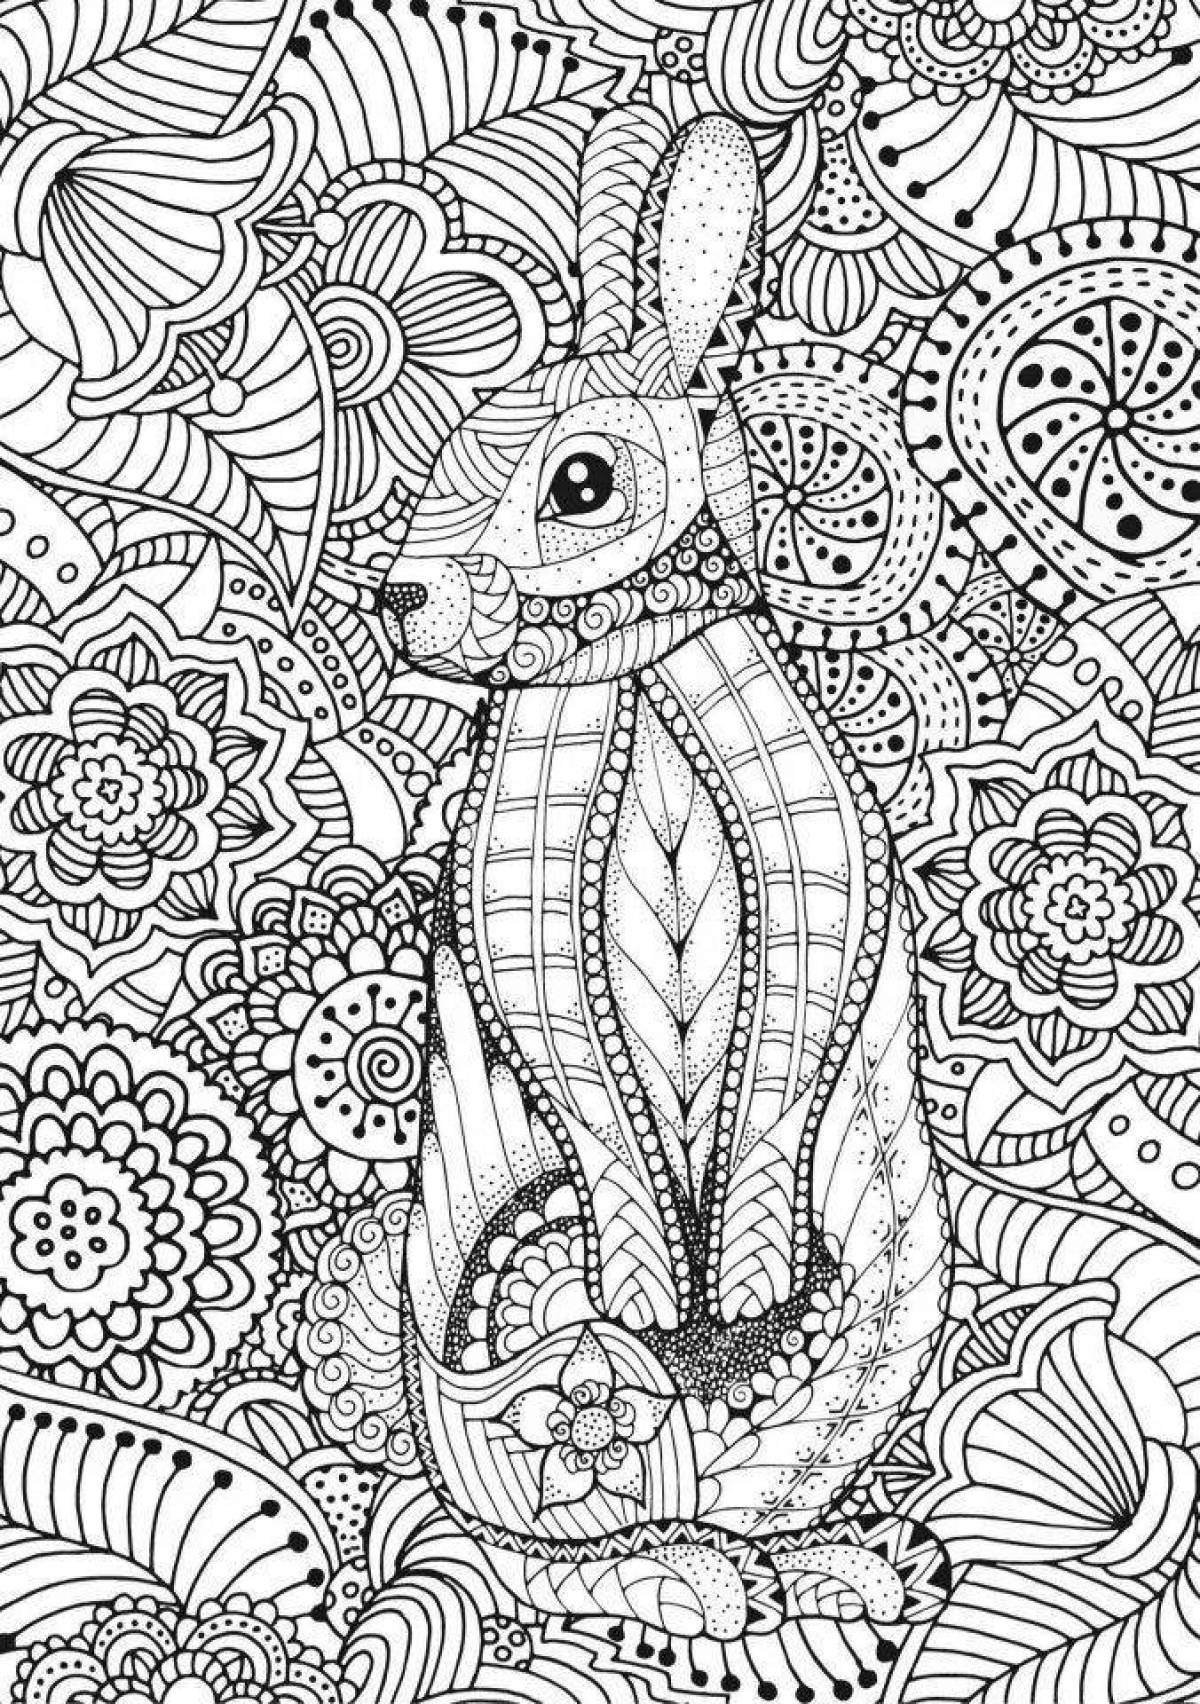 Bright anti-stress coloring book for adults